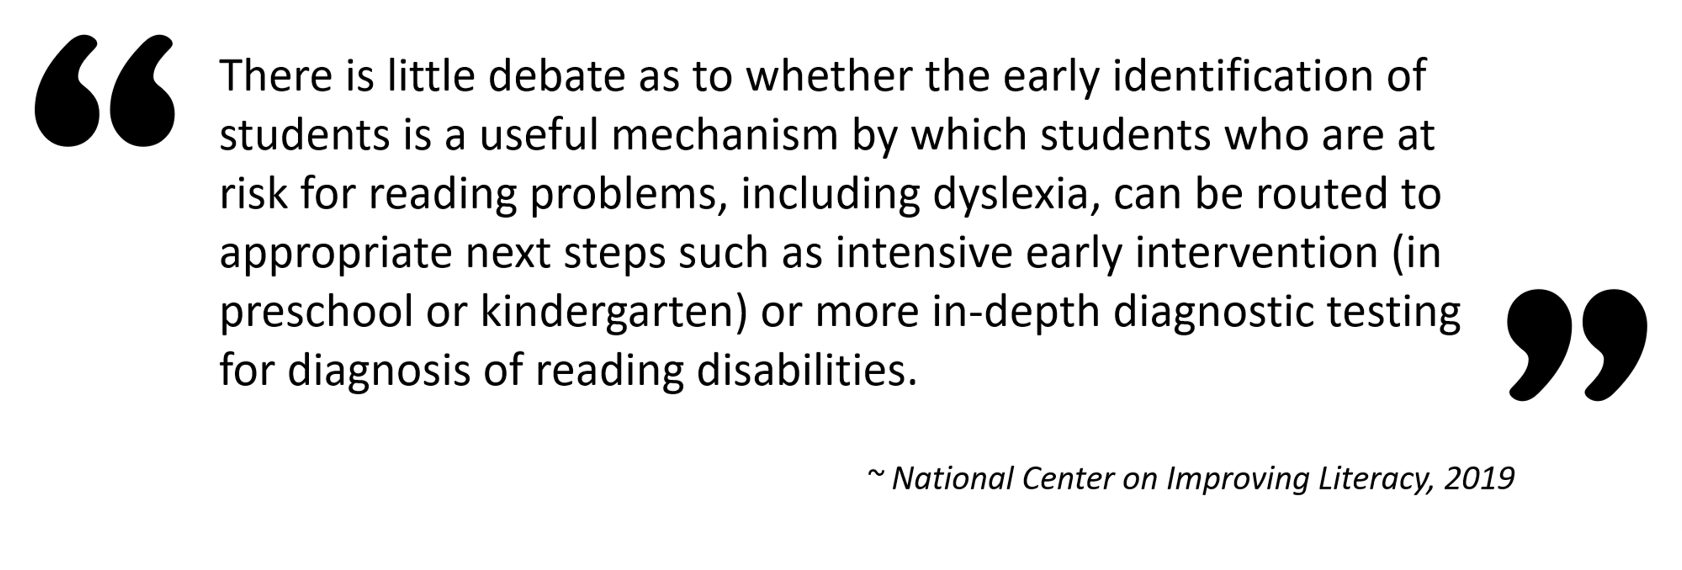 Image of a quote from National Center on Improving Literacy, 2019 